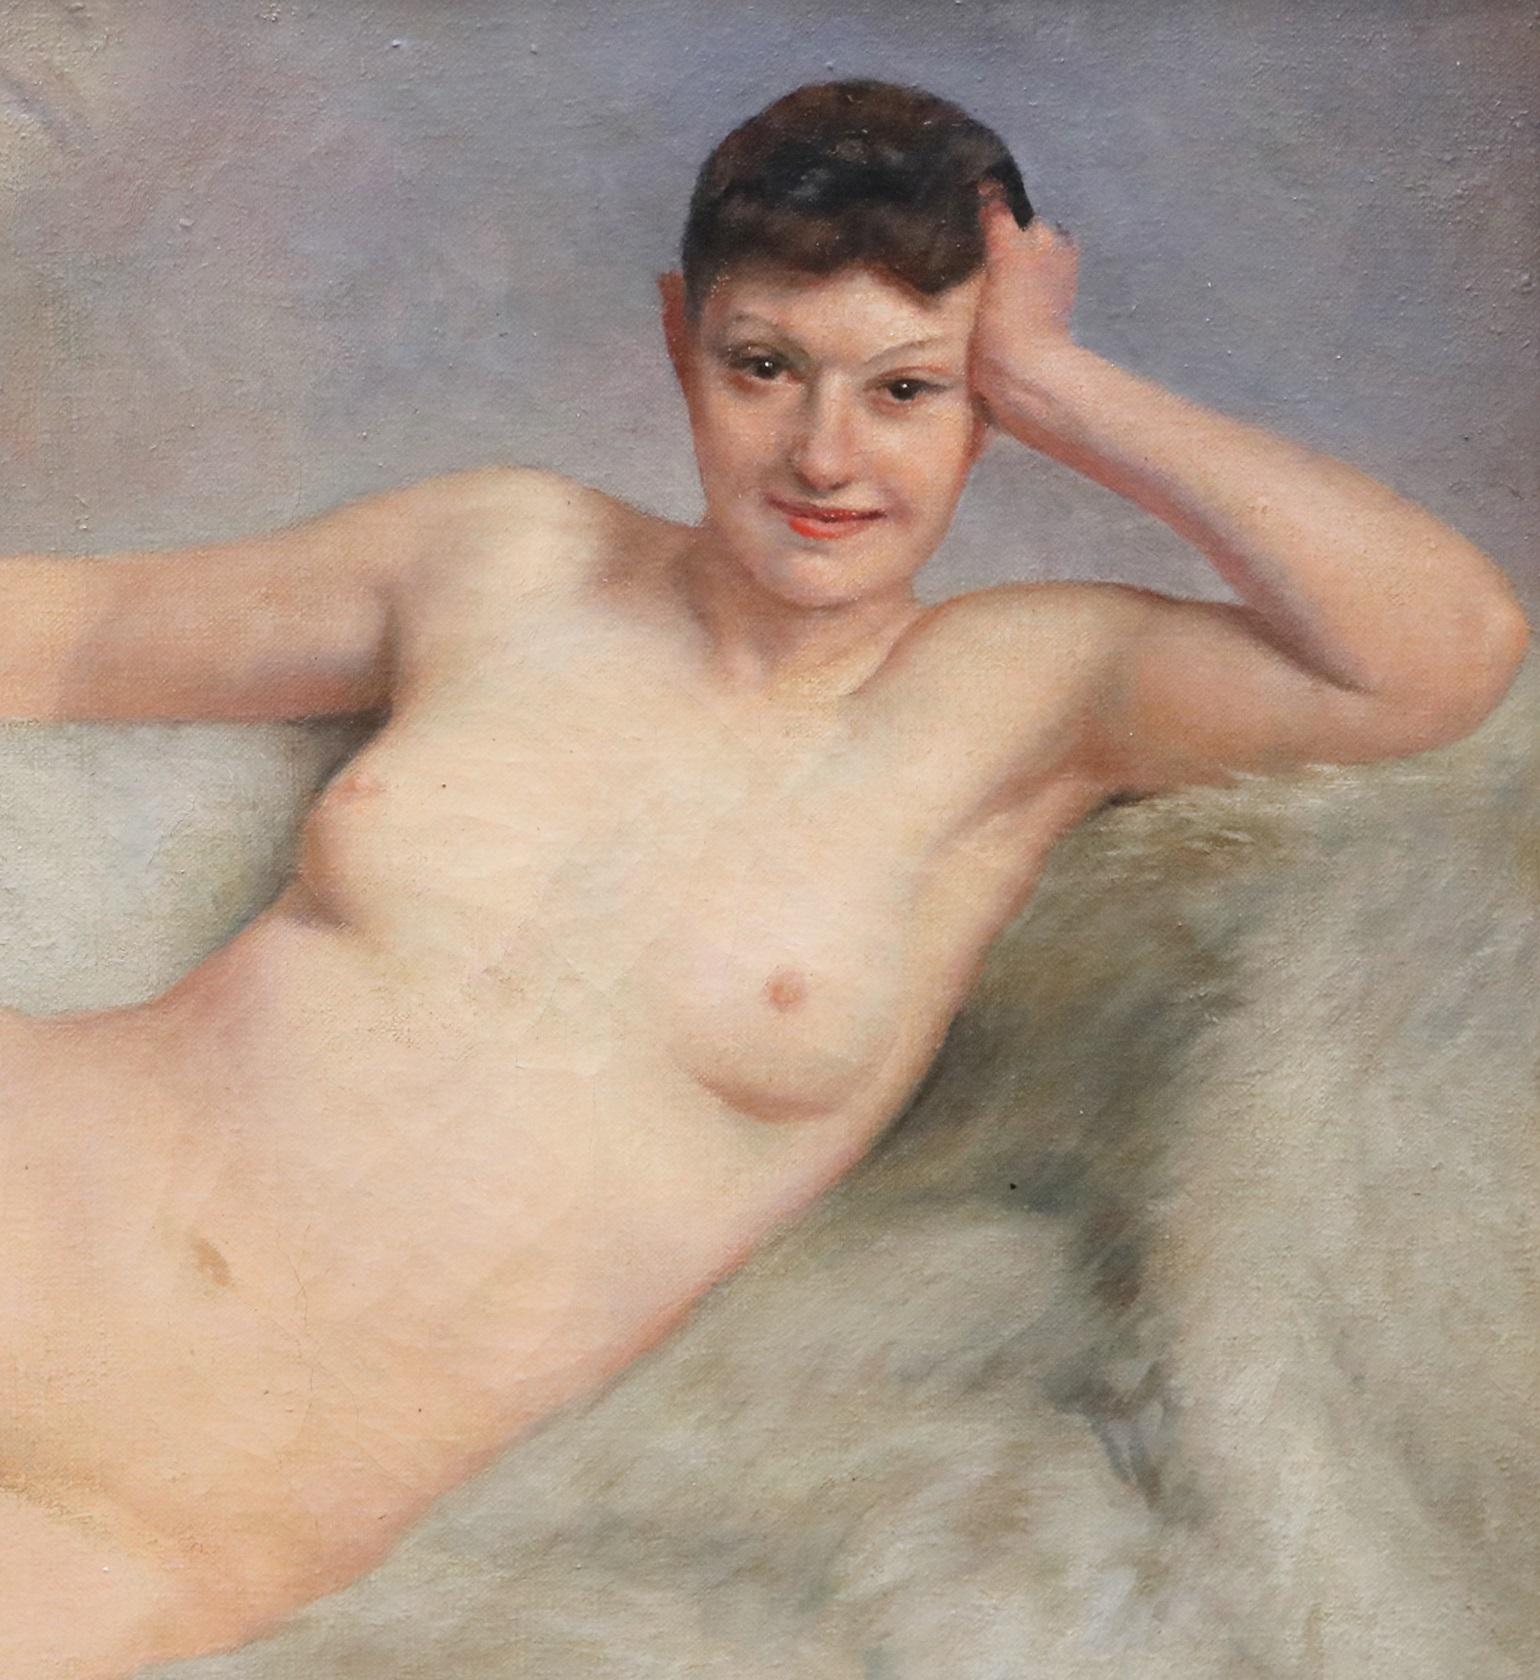 ‘Nu Allongé avec un Éventail’ by Paul Sieffert (1874-1957). The painting – which depicts a reclining nude holding a fan – is signed by the artist and presented in a fine quality post-Impressionist frame.	

Paul Sieffert studied at the École des